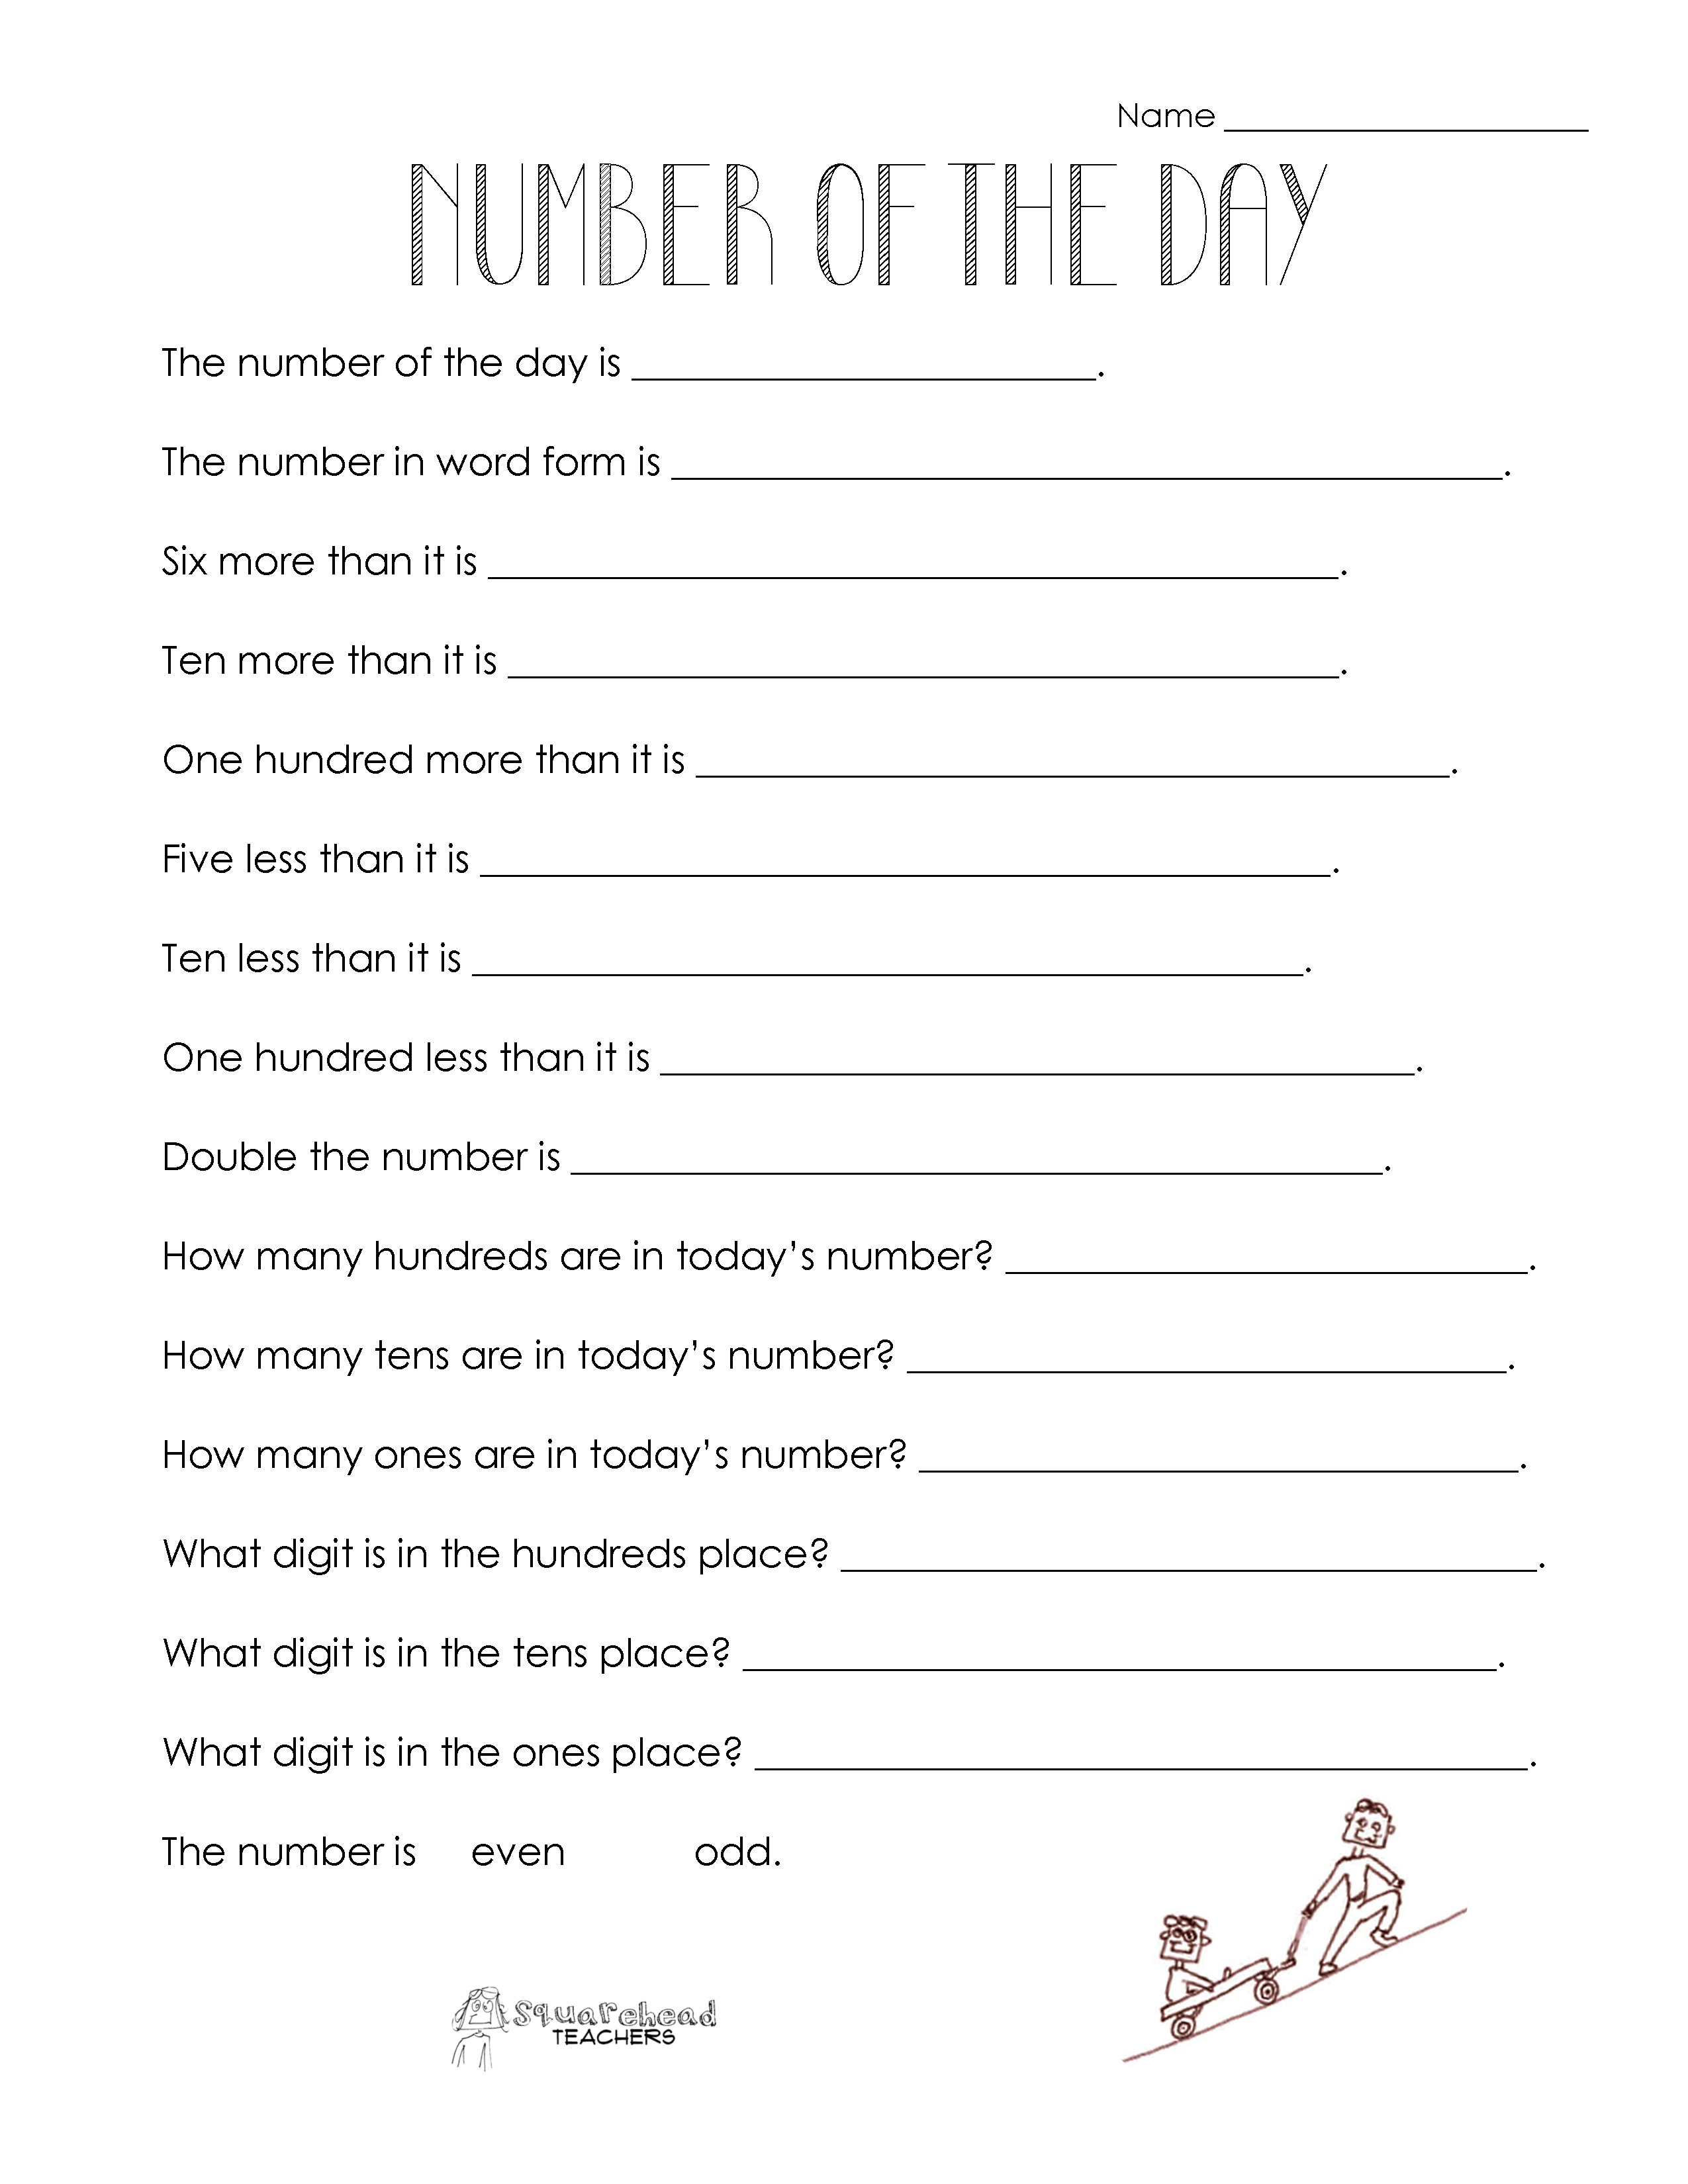 Number Of The Day (Worksheet Collection) | Squarehead Teachers - Free Printable Number Of The Day Worksheets